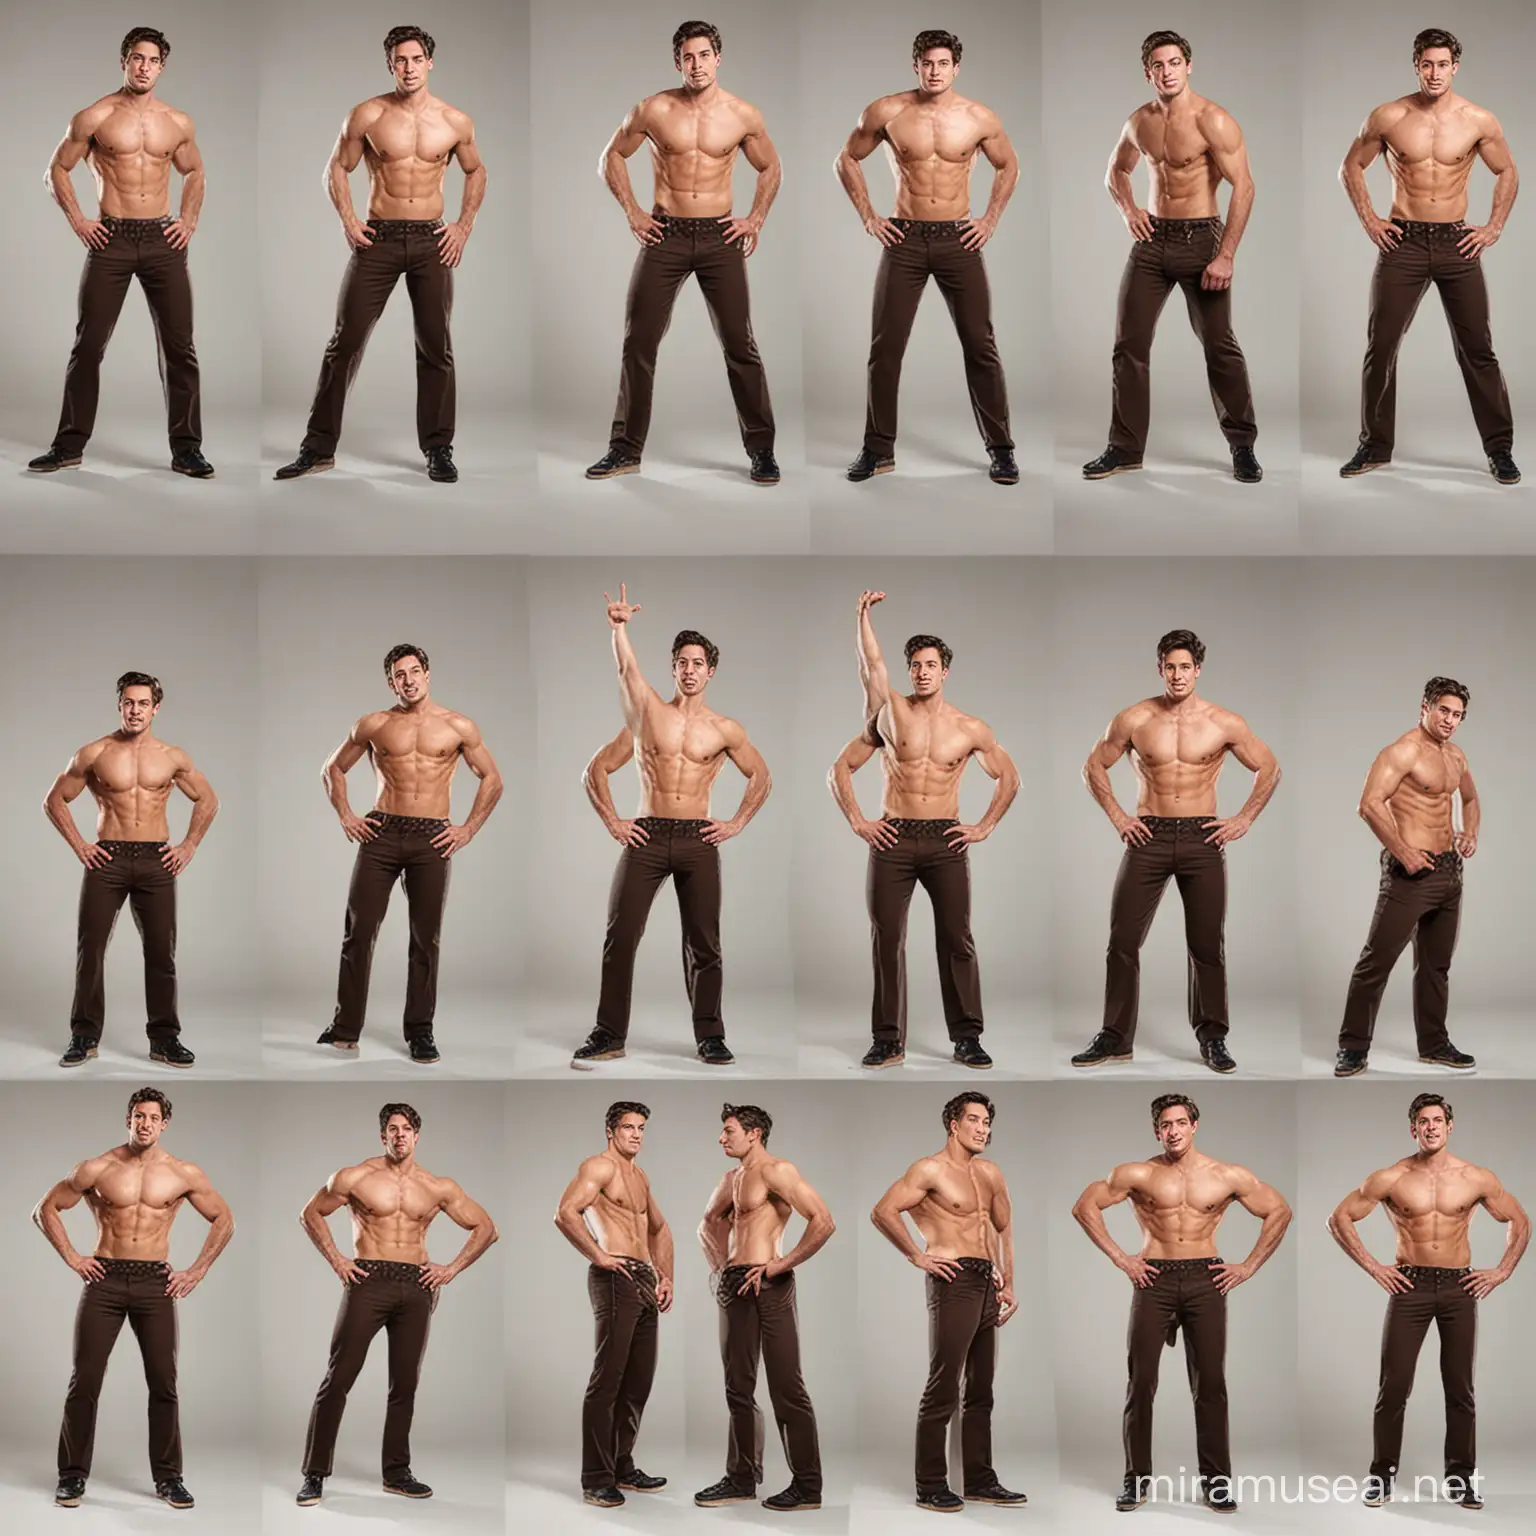 Ten Original Male Model Poses for Creative Photography Inspiration